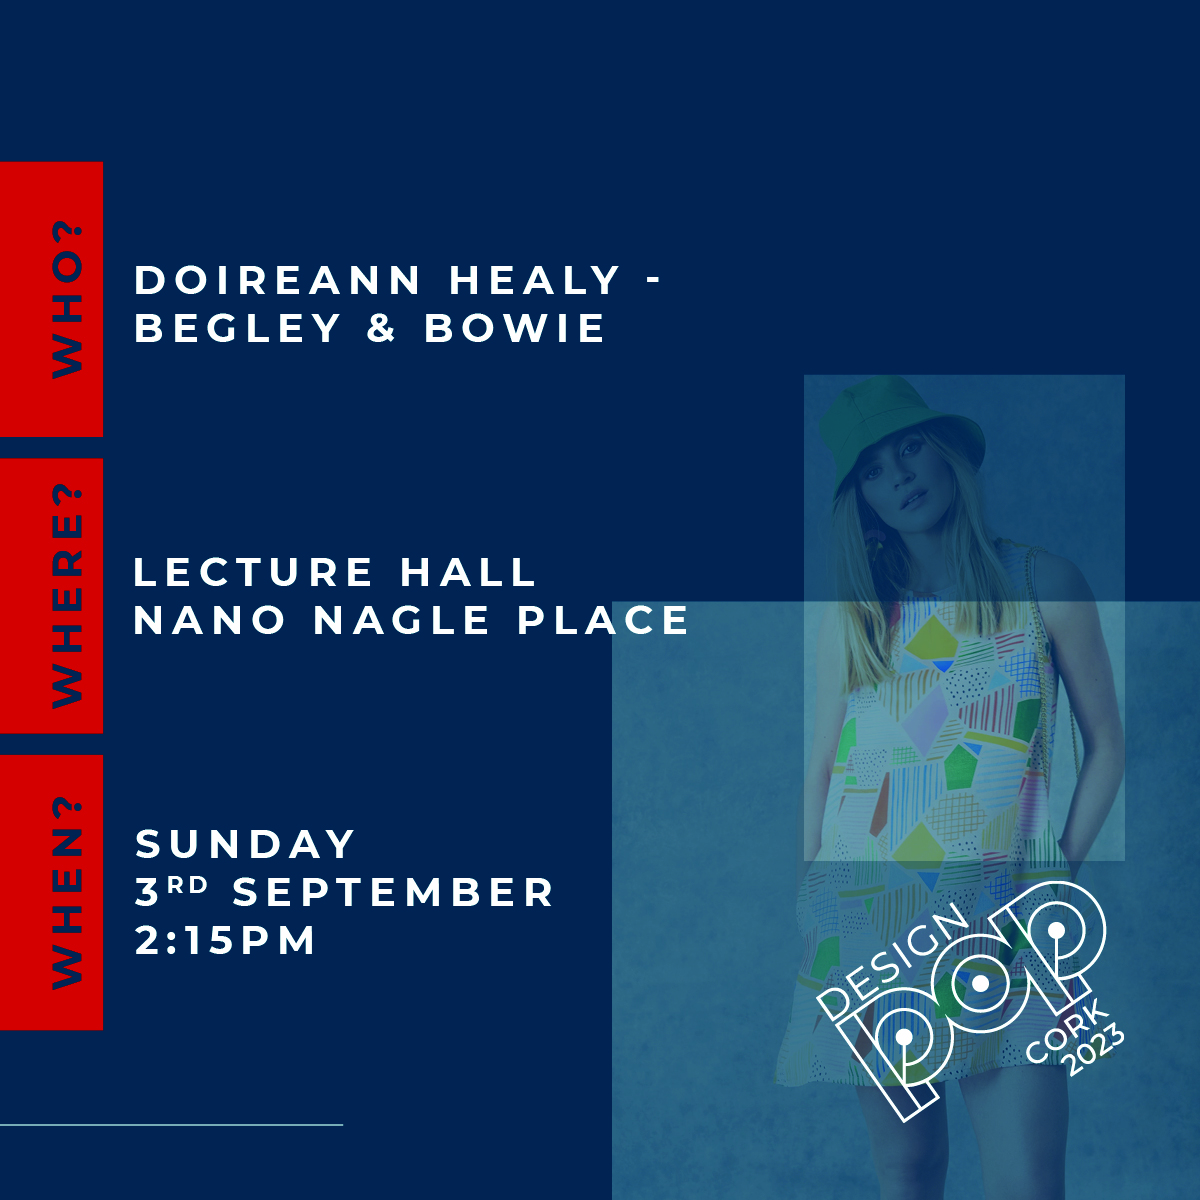 MEET DOIREANN HEALY Doireann launched art & fashion brand Begley & Bowie in 2019, designing beautiful art and eco-friendly fashion pieces from her shop and studio in Kenmare. Secure your tickets today: eventbrite.ie/b/ireland--cor… Supported by @corkcitycouncil #designpop23